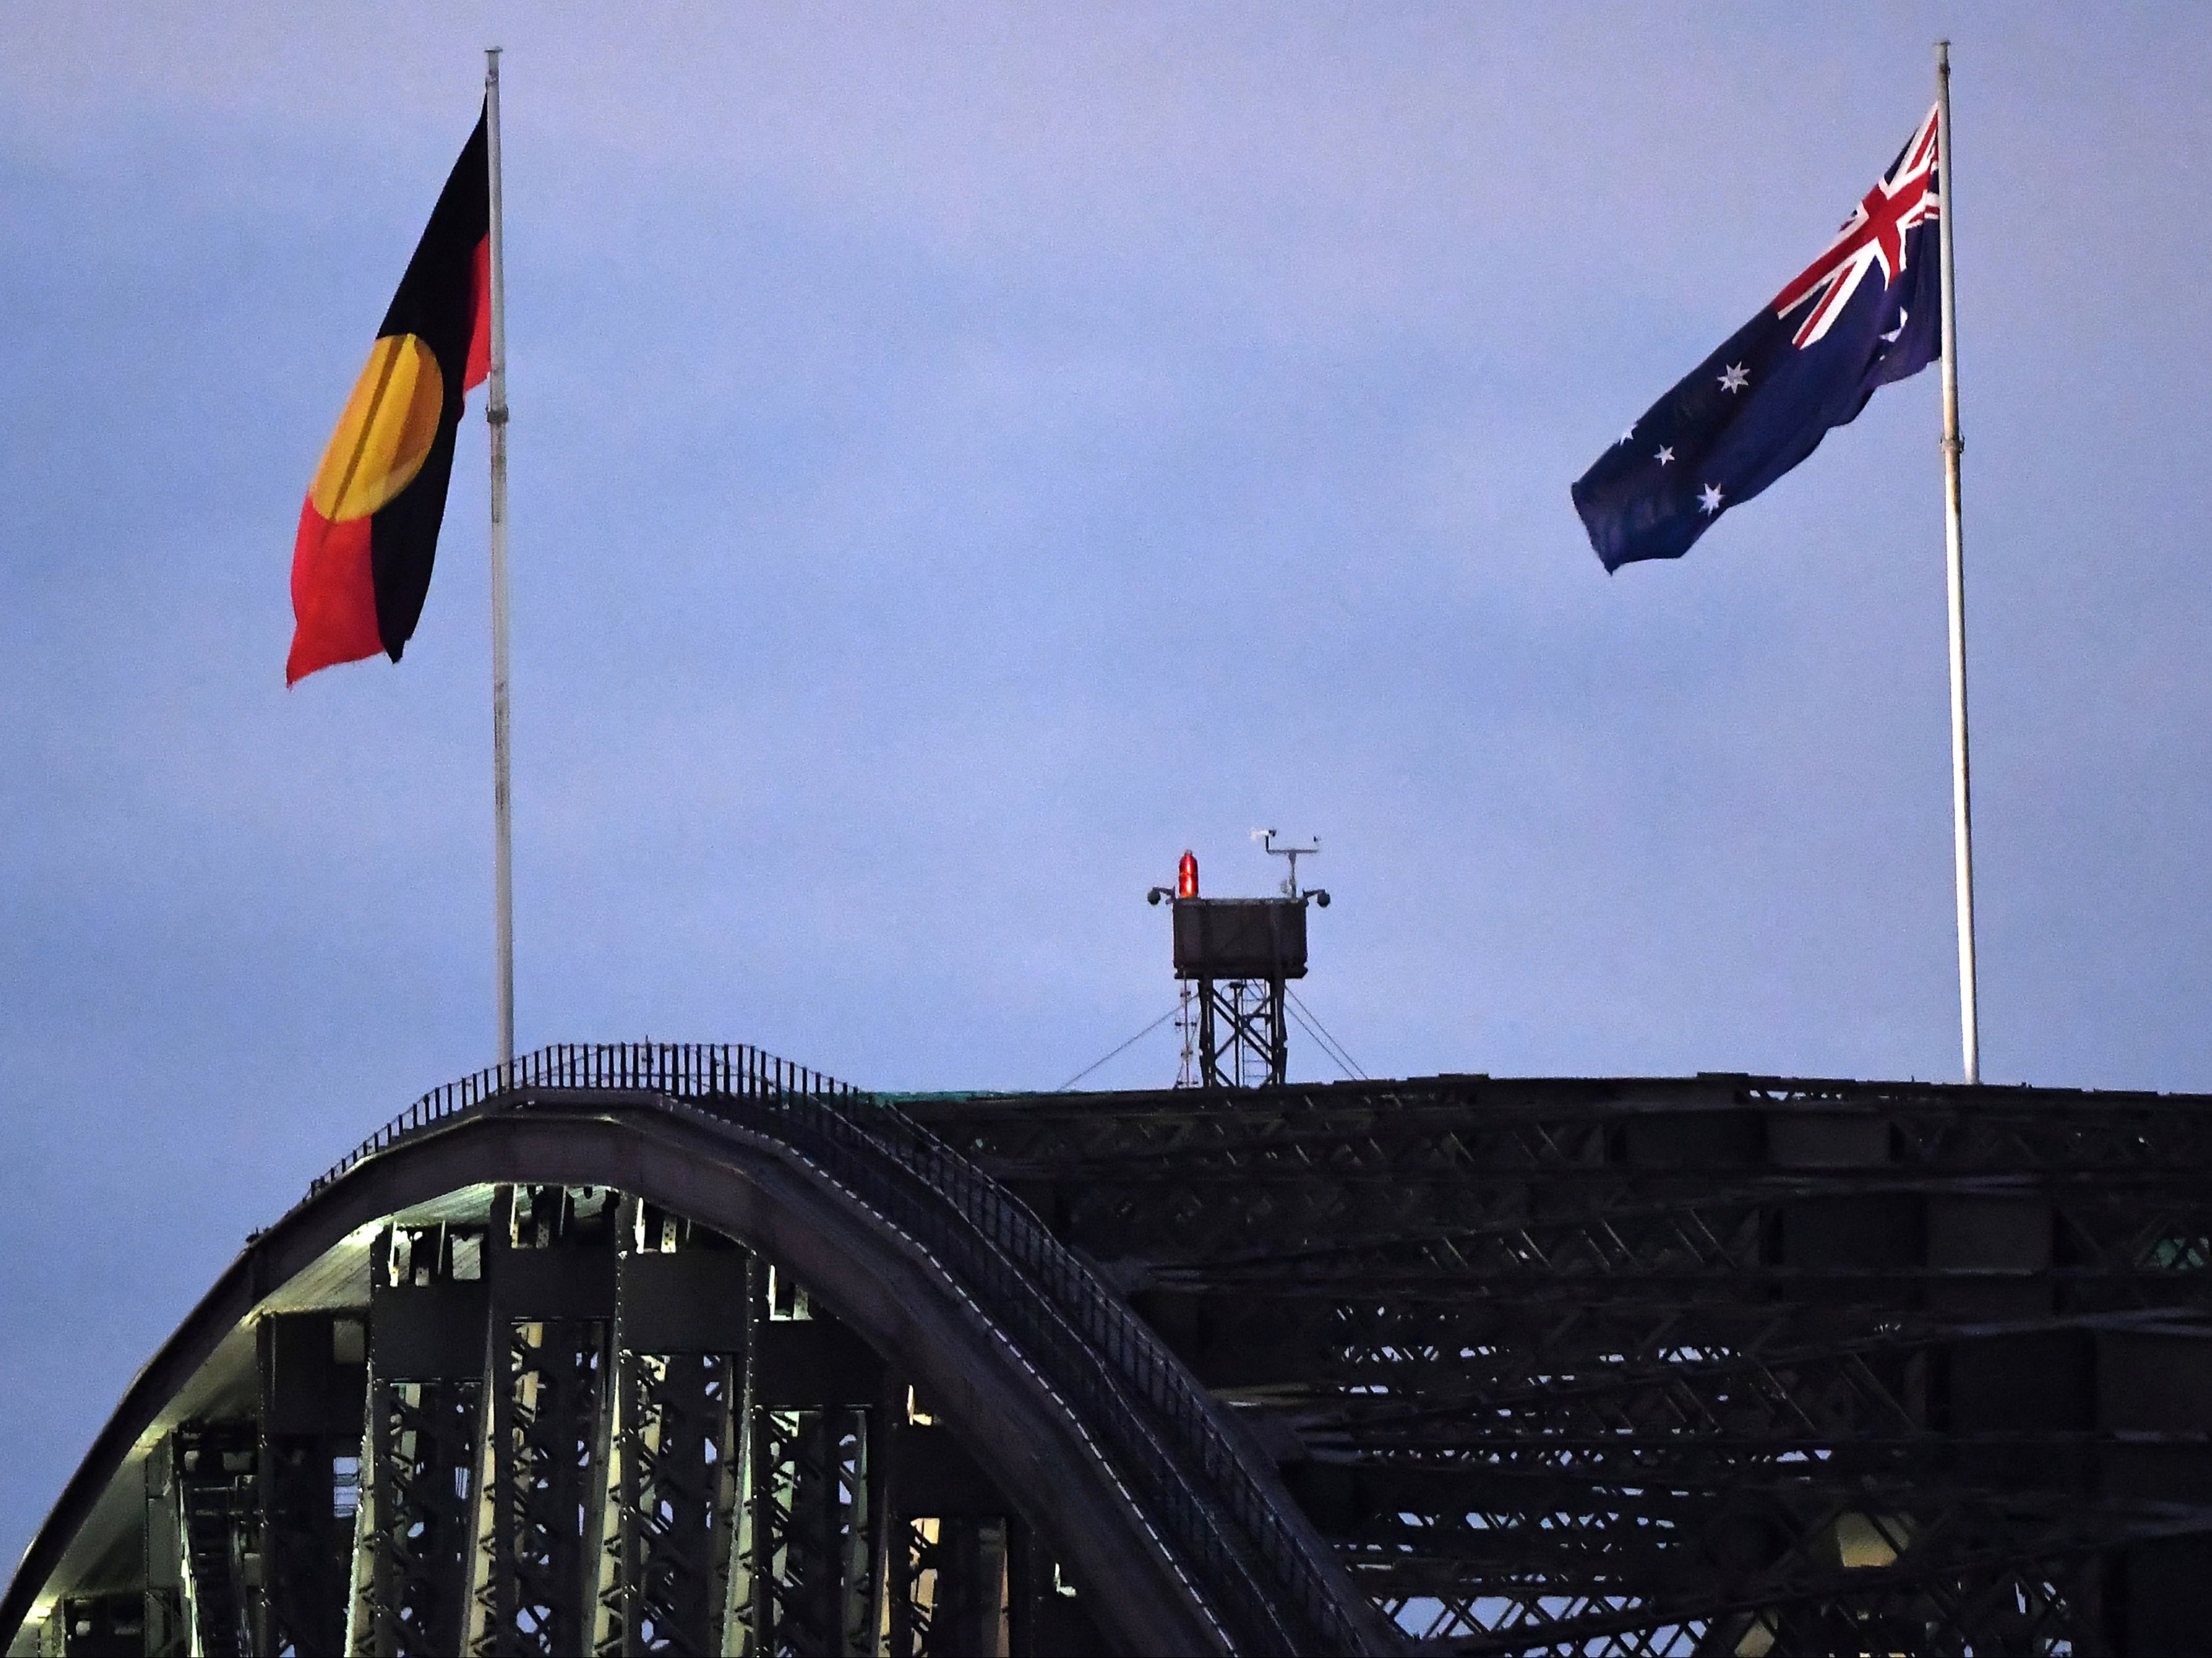 Australia’s black, red and yellow Aboriginal flag (left) flies beside Australia’s national flag over the Harbour Bridge in Sydney on 11 July in a symbolic victory for indigenous communities after a years-long fight